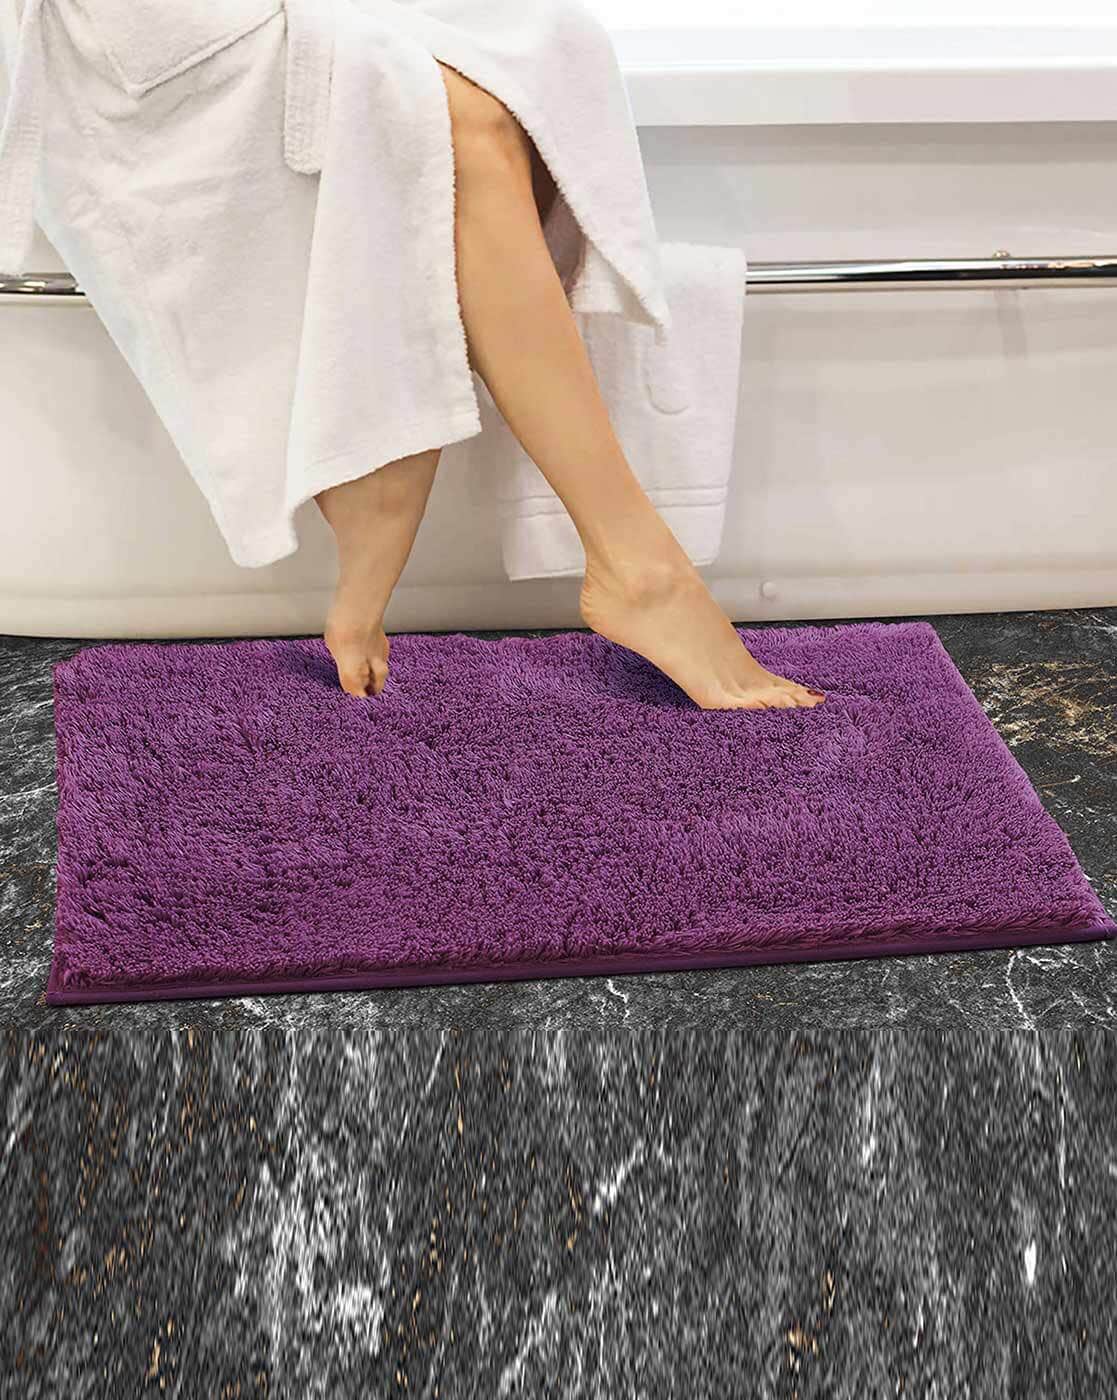 Pano Purple Floral Printed 2050GSM Bath Rugs Price In, 52% OFF